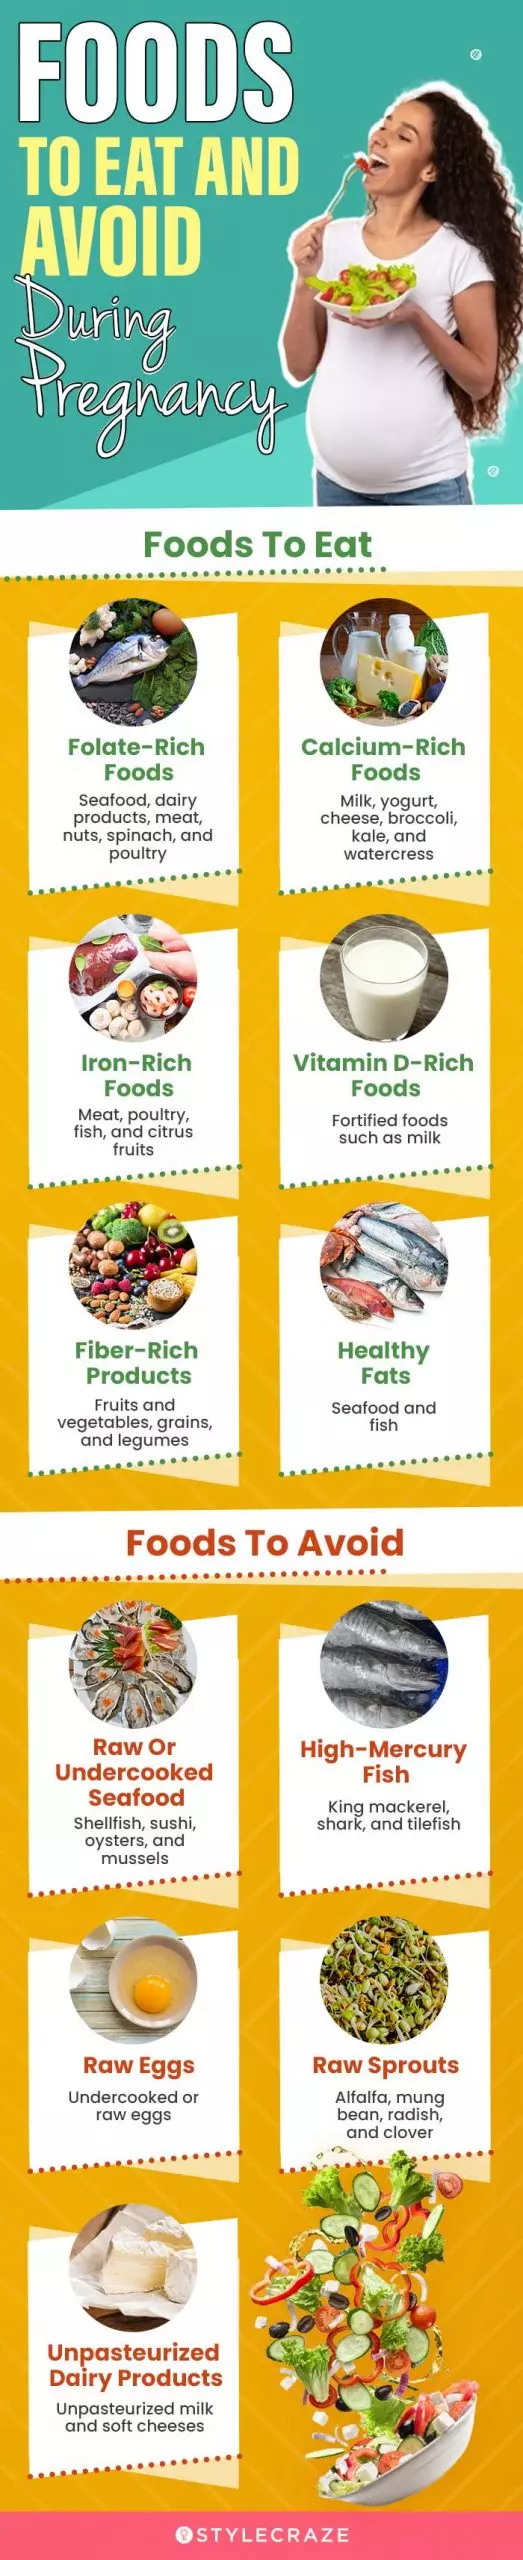 foods to eat and avoid during pregnancy (infographic)